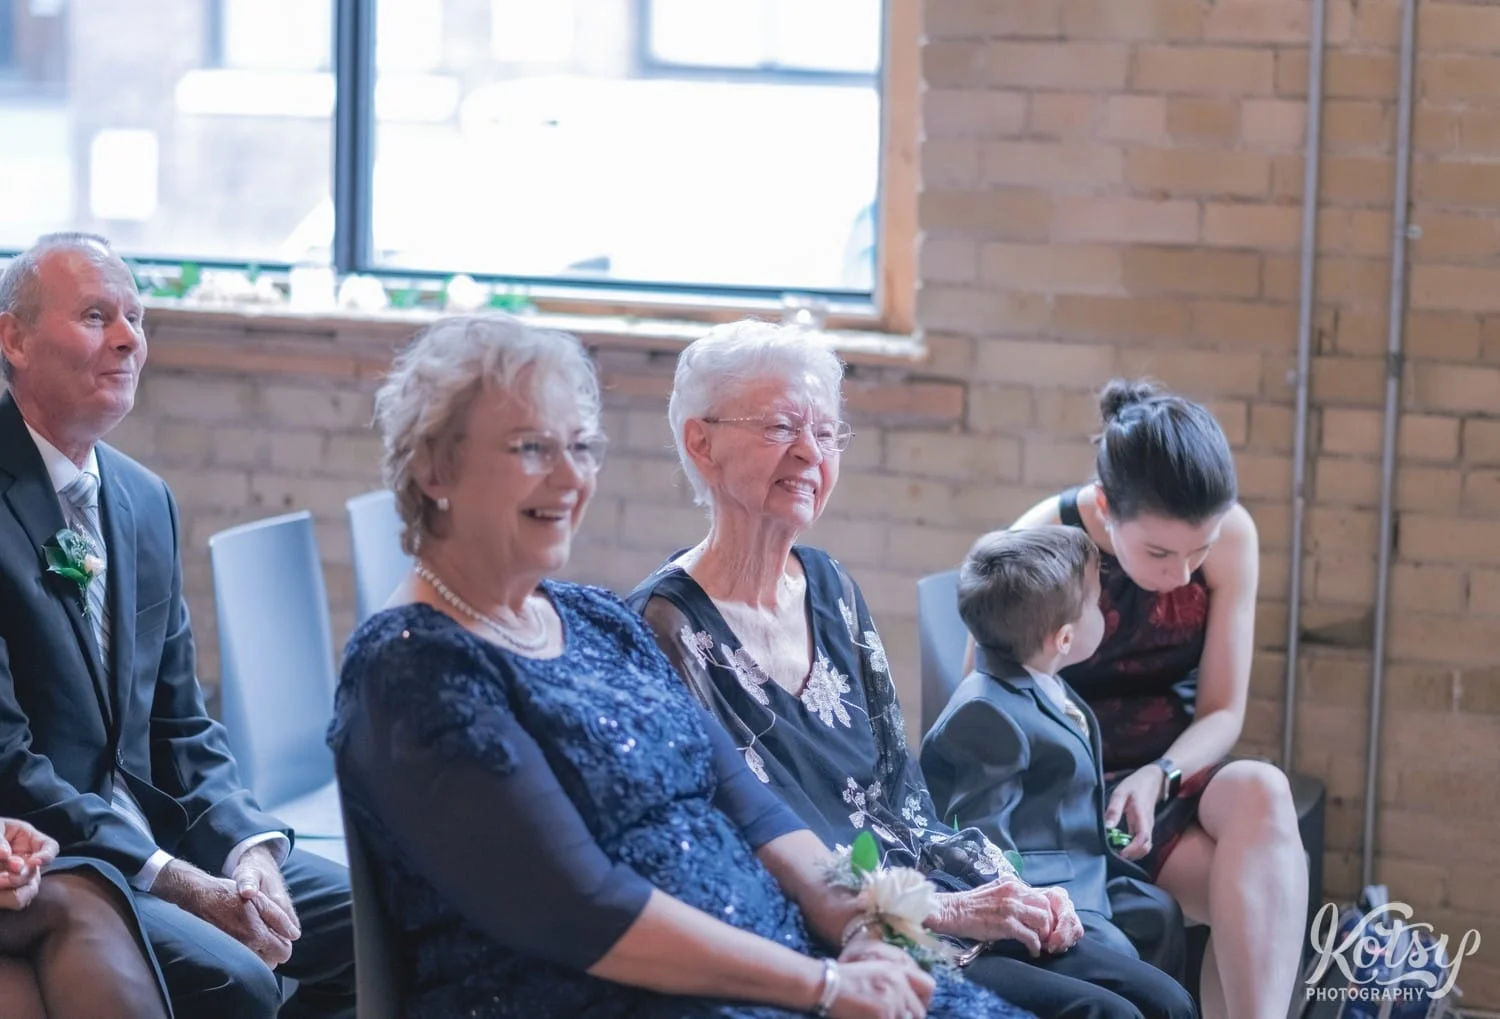 Two elderly woman's look off camera while smiling during a Second Floor Events wedding ceremony in Toronto, Canada